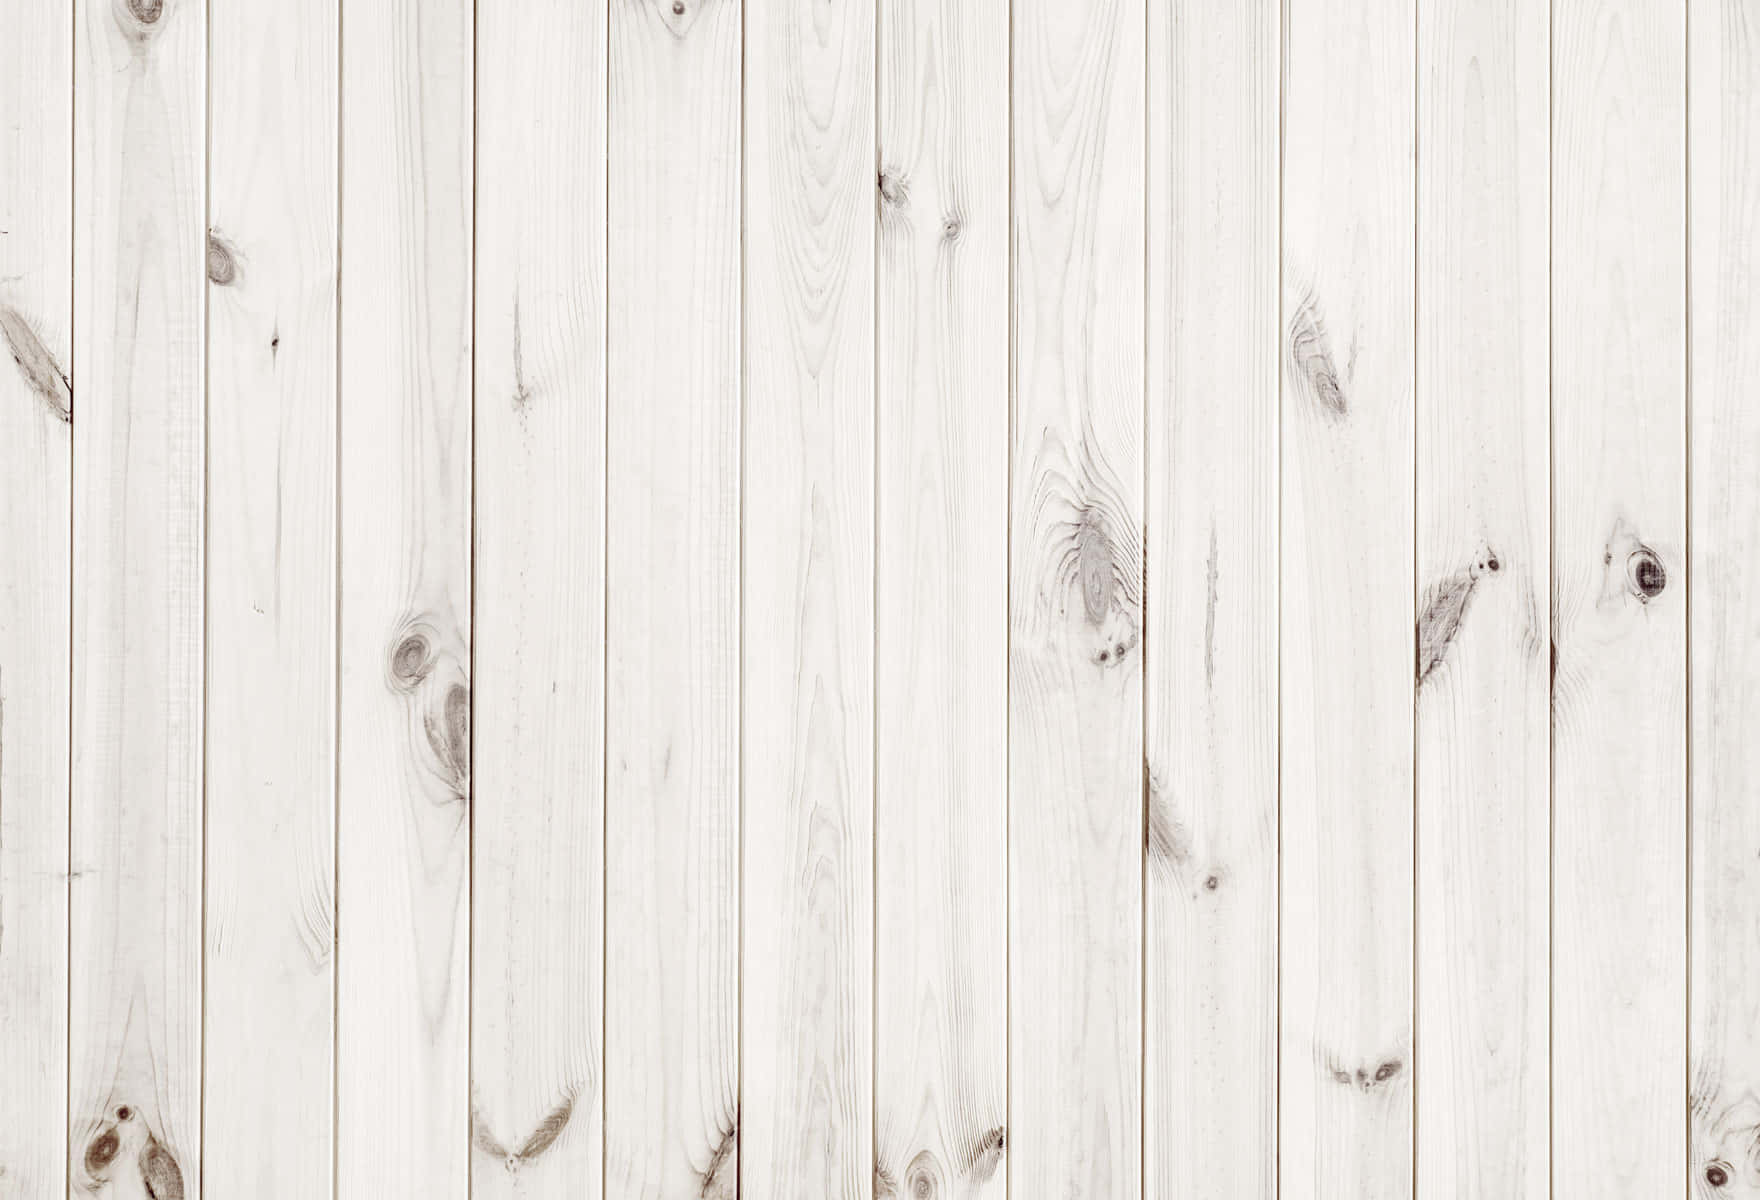 Rustic shiplap that creates the perfect backdrop.